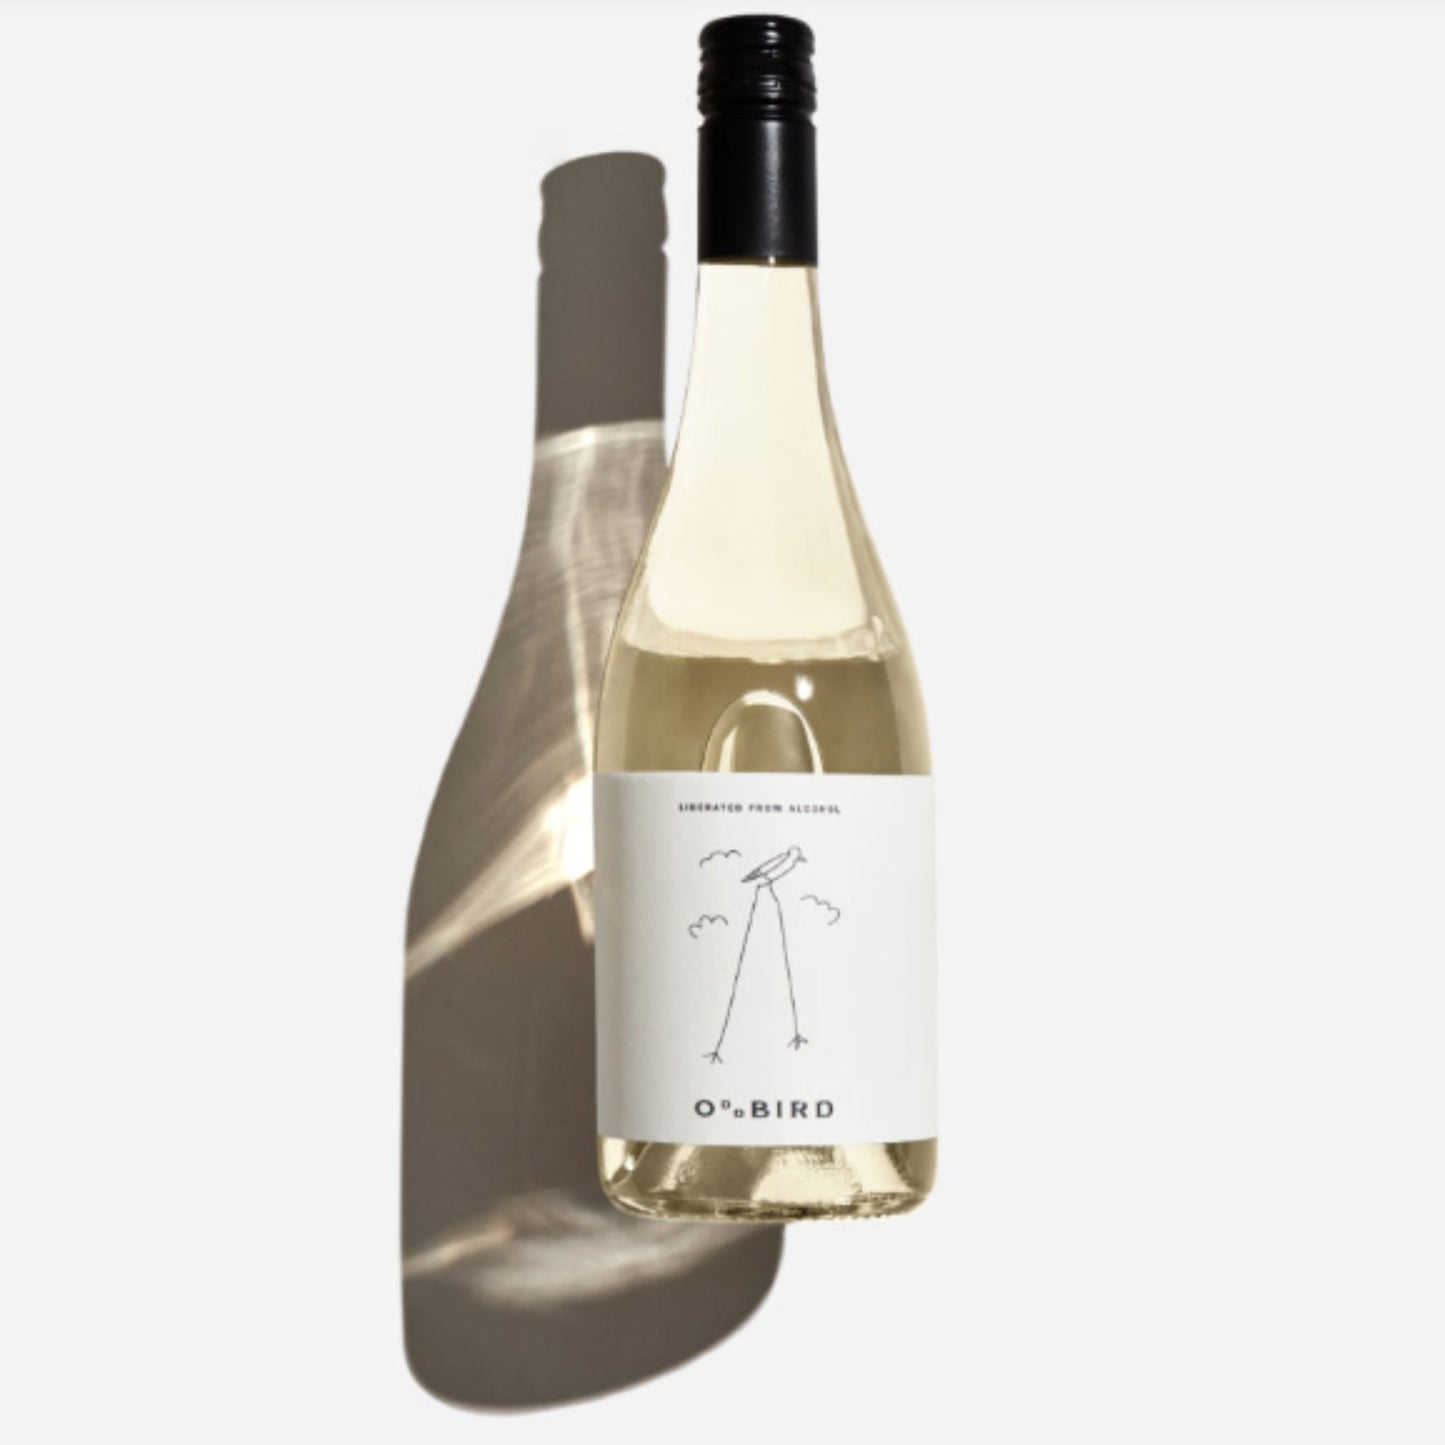 OddBird Low Intervention Organic White Nº 1 non-alcoholic wine is available for sale at Knyota Drinks in Ottawa.